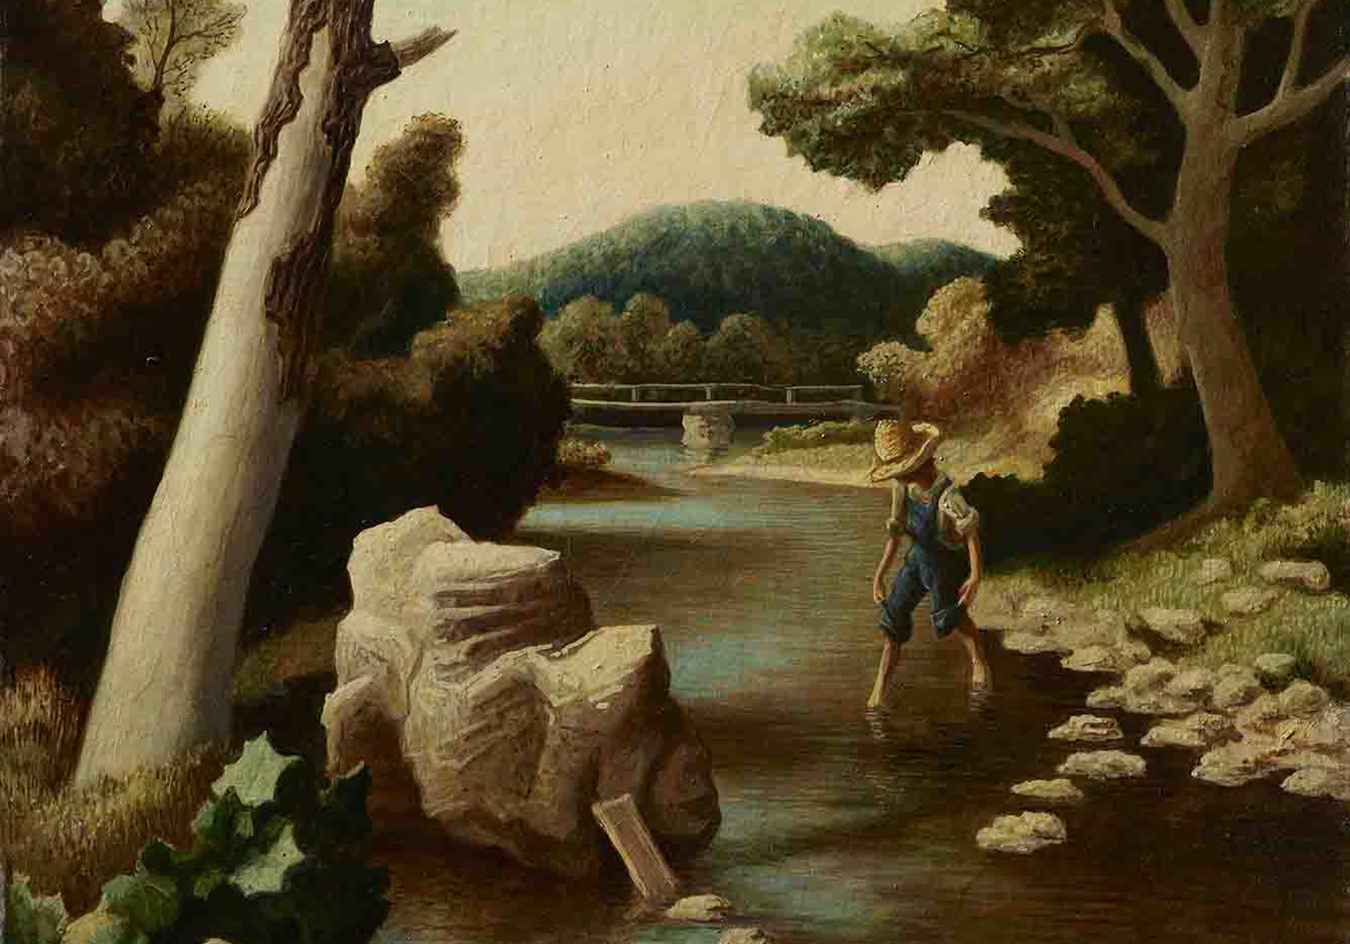 Thomas Hart Benton (American, 1889–1975), Shallow Creek, 1938–39, oil and Egg tempera on canvas mounted on board, 36 x 25 inches. Bequest of James R. and Barbara R. Palmer, 2019.31. © 2021 T.H. and R.P. Benton Trusts / Licensed by Artists Rights Society (ARS), New York